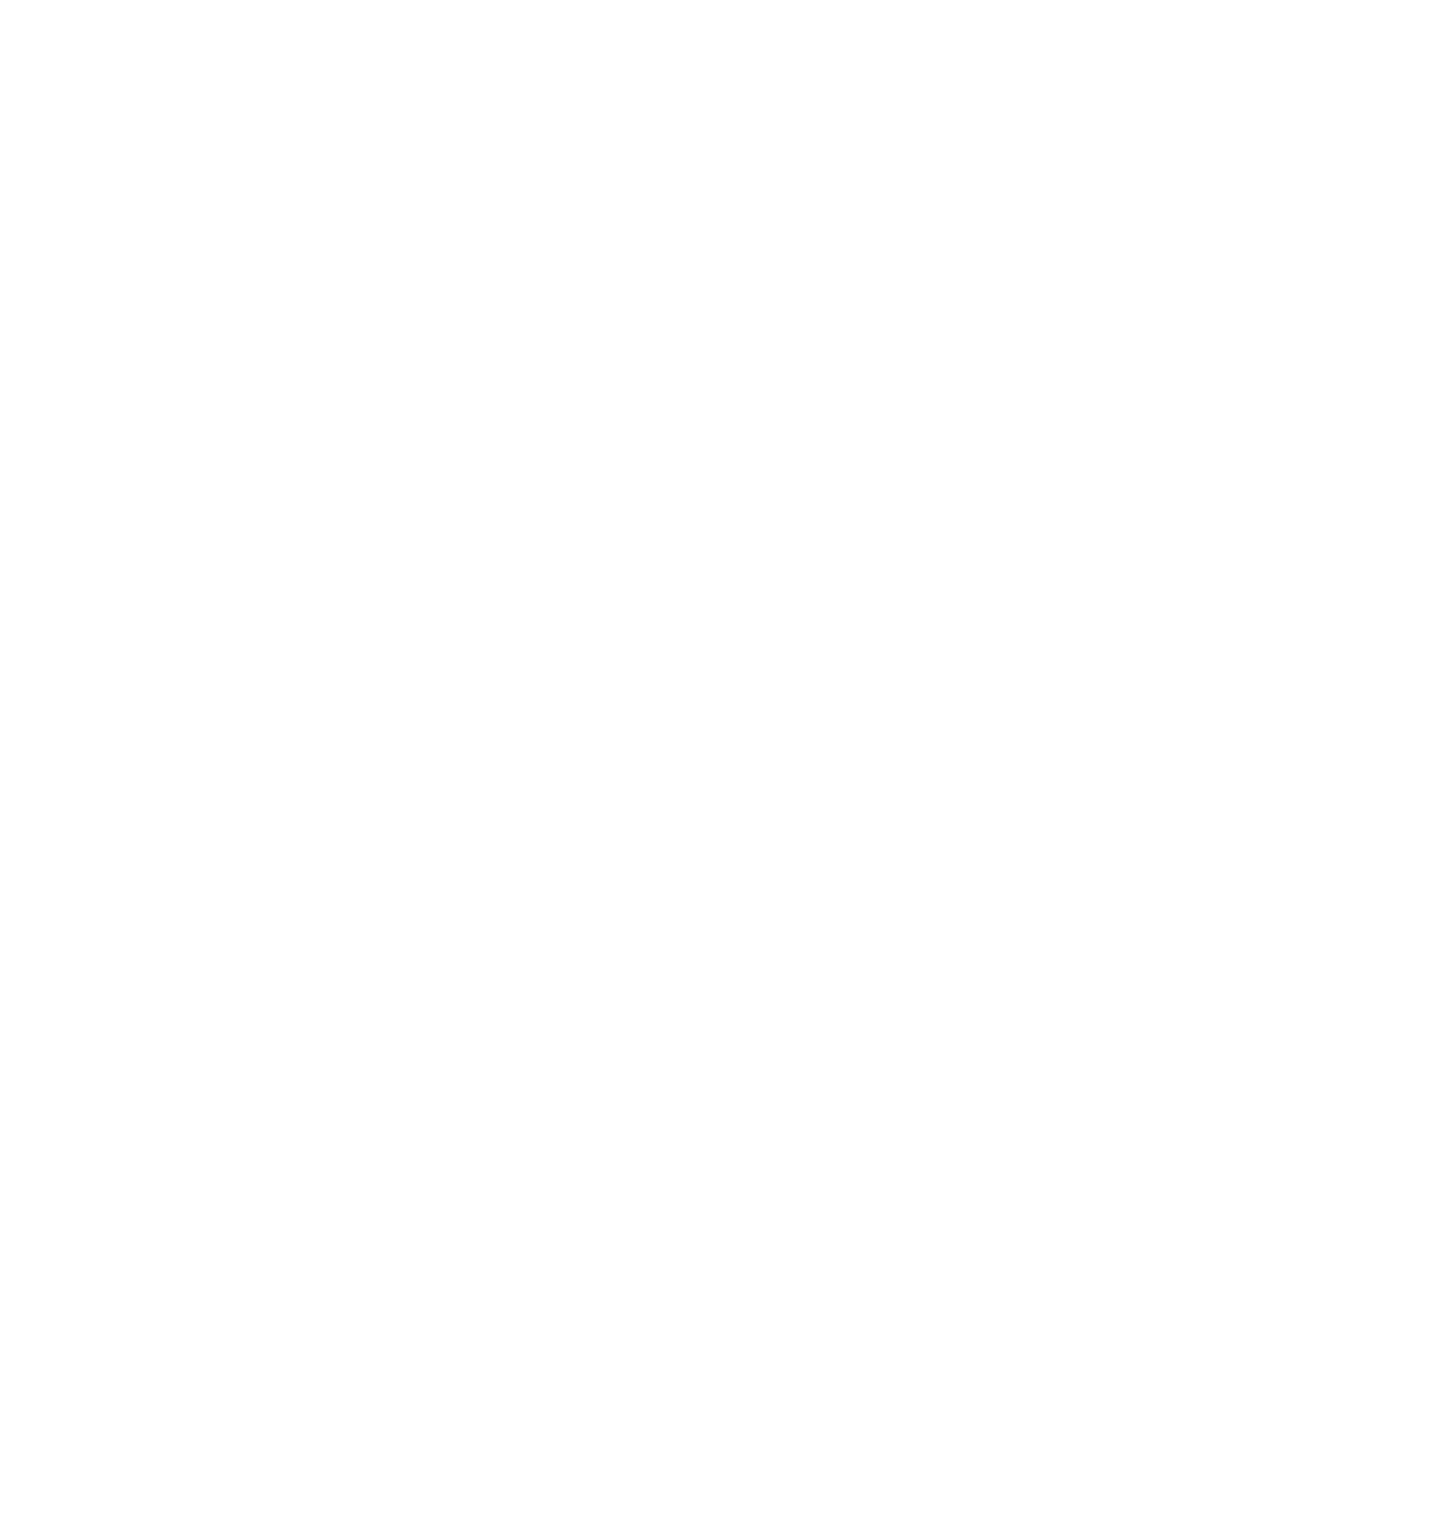 TwisterFoods-White